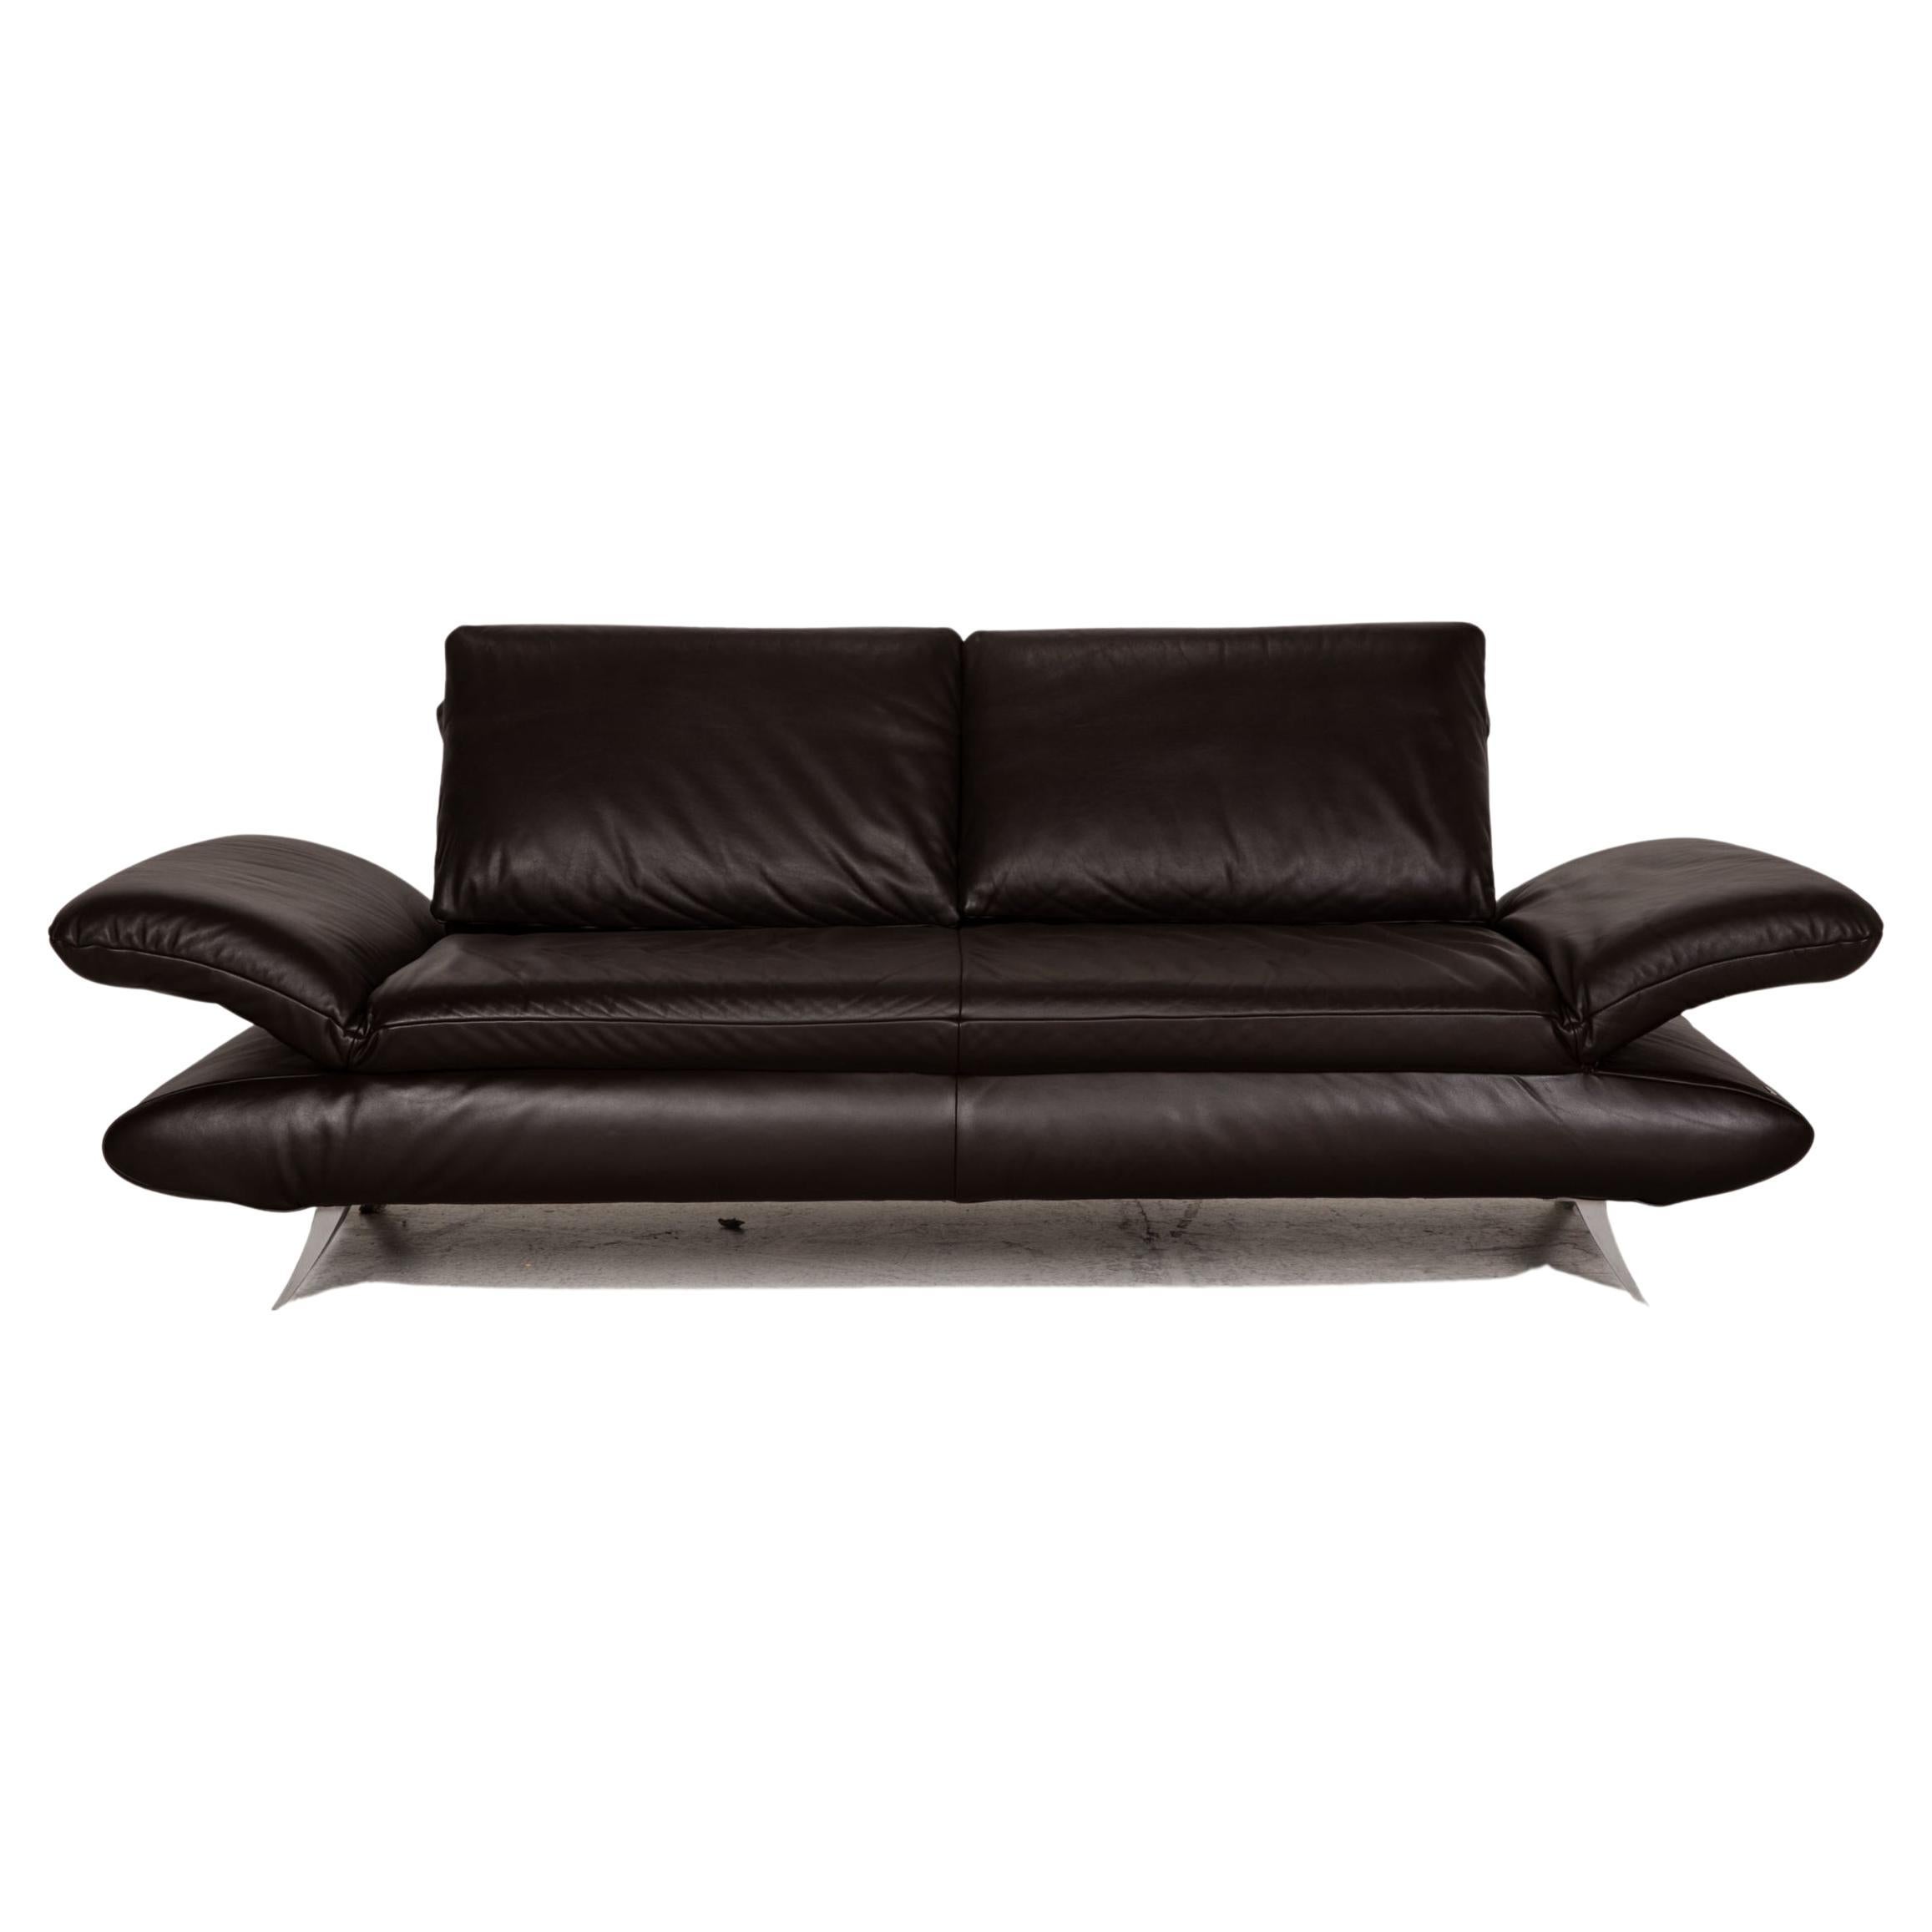 Koinor Rossini Leather Sofa Dark Brown Two-Seater Couch Function For Sale